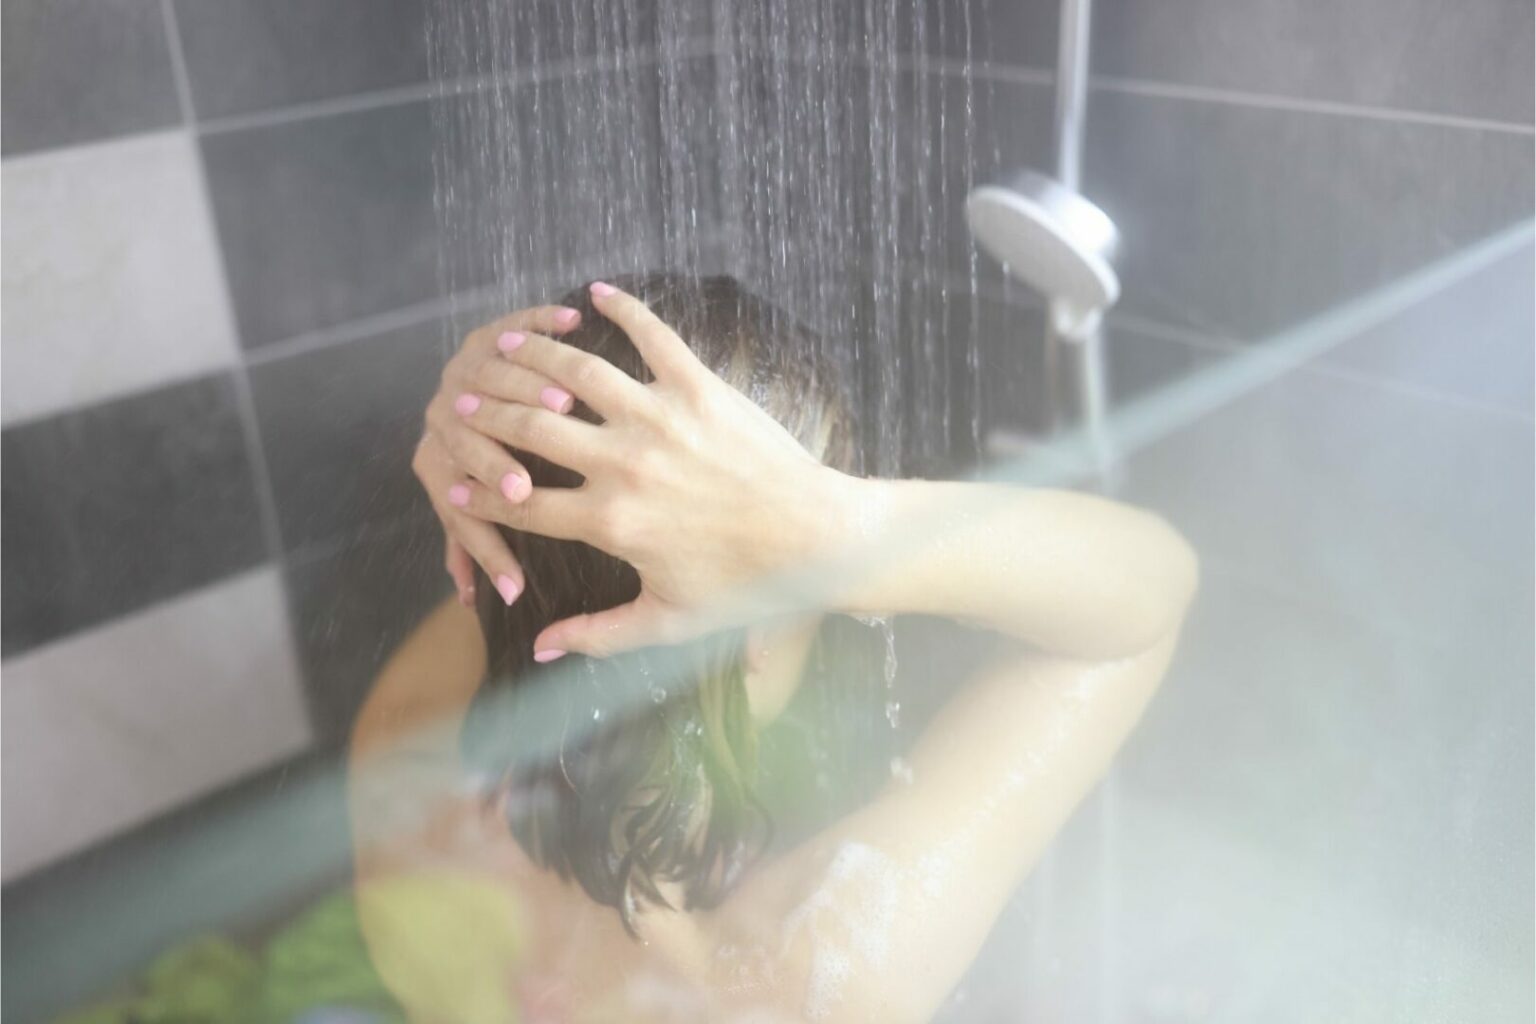 Your Ultimate Guide to Truck Stop Showers - Getaway Couple